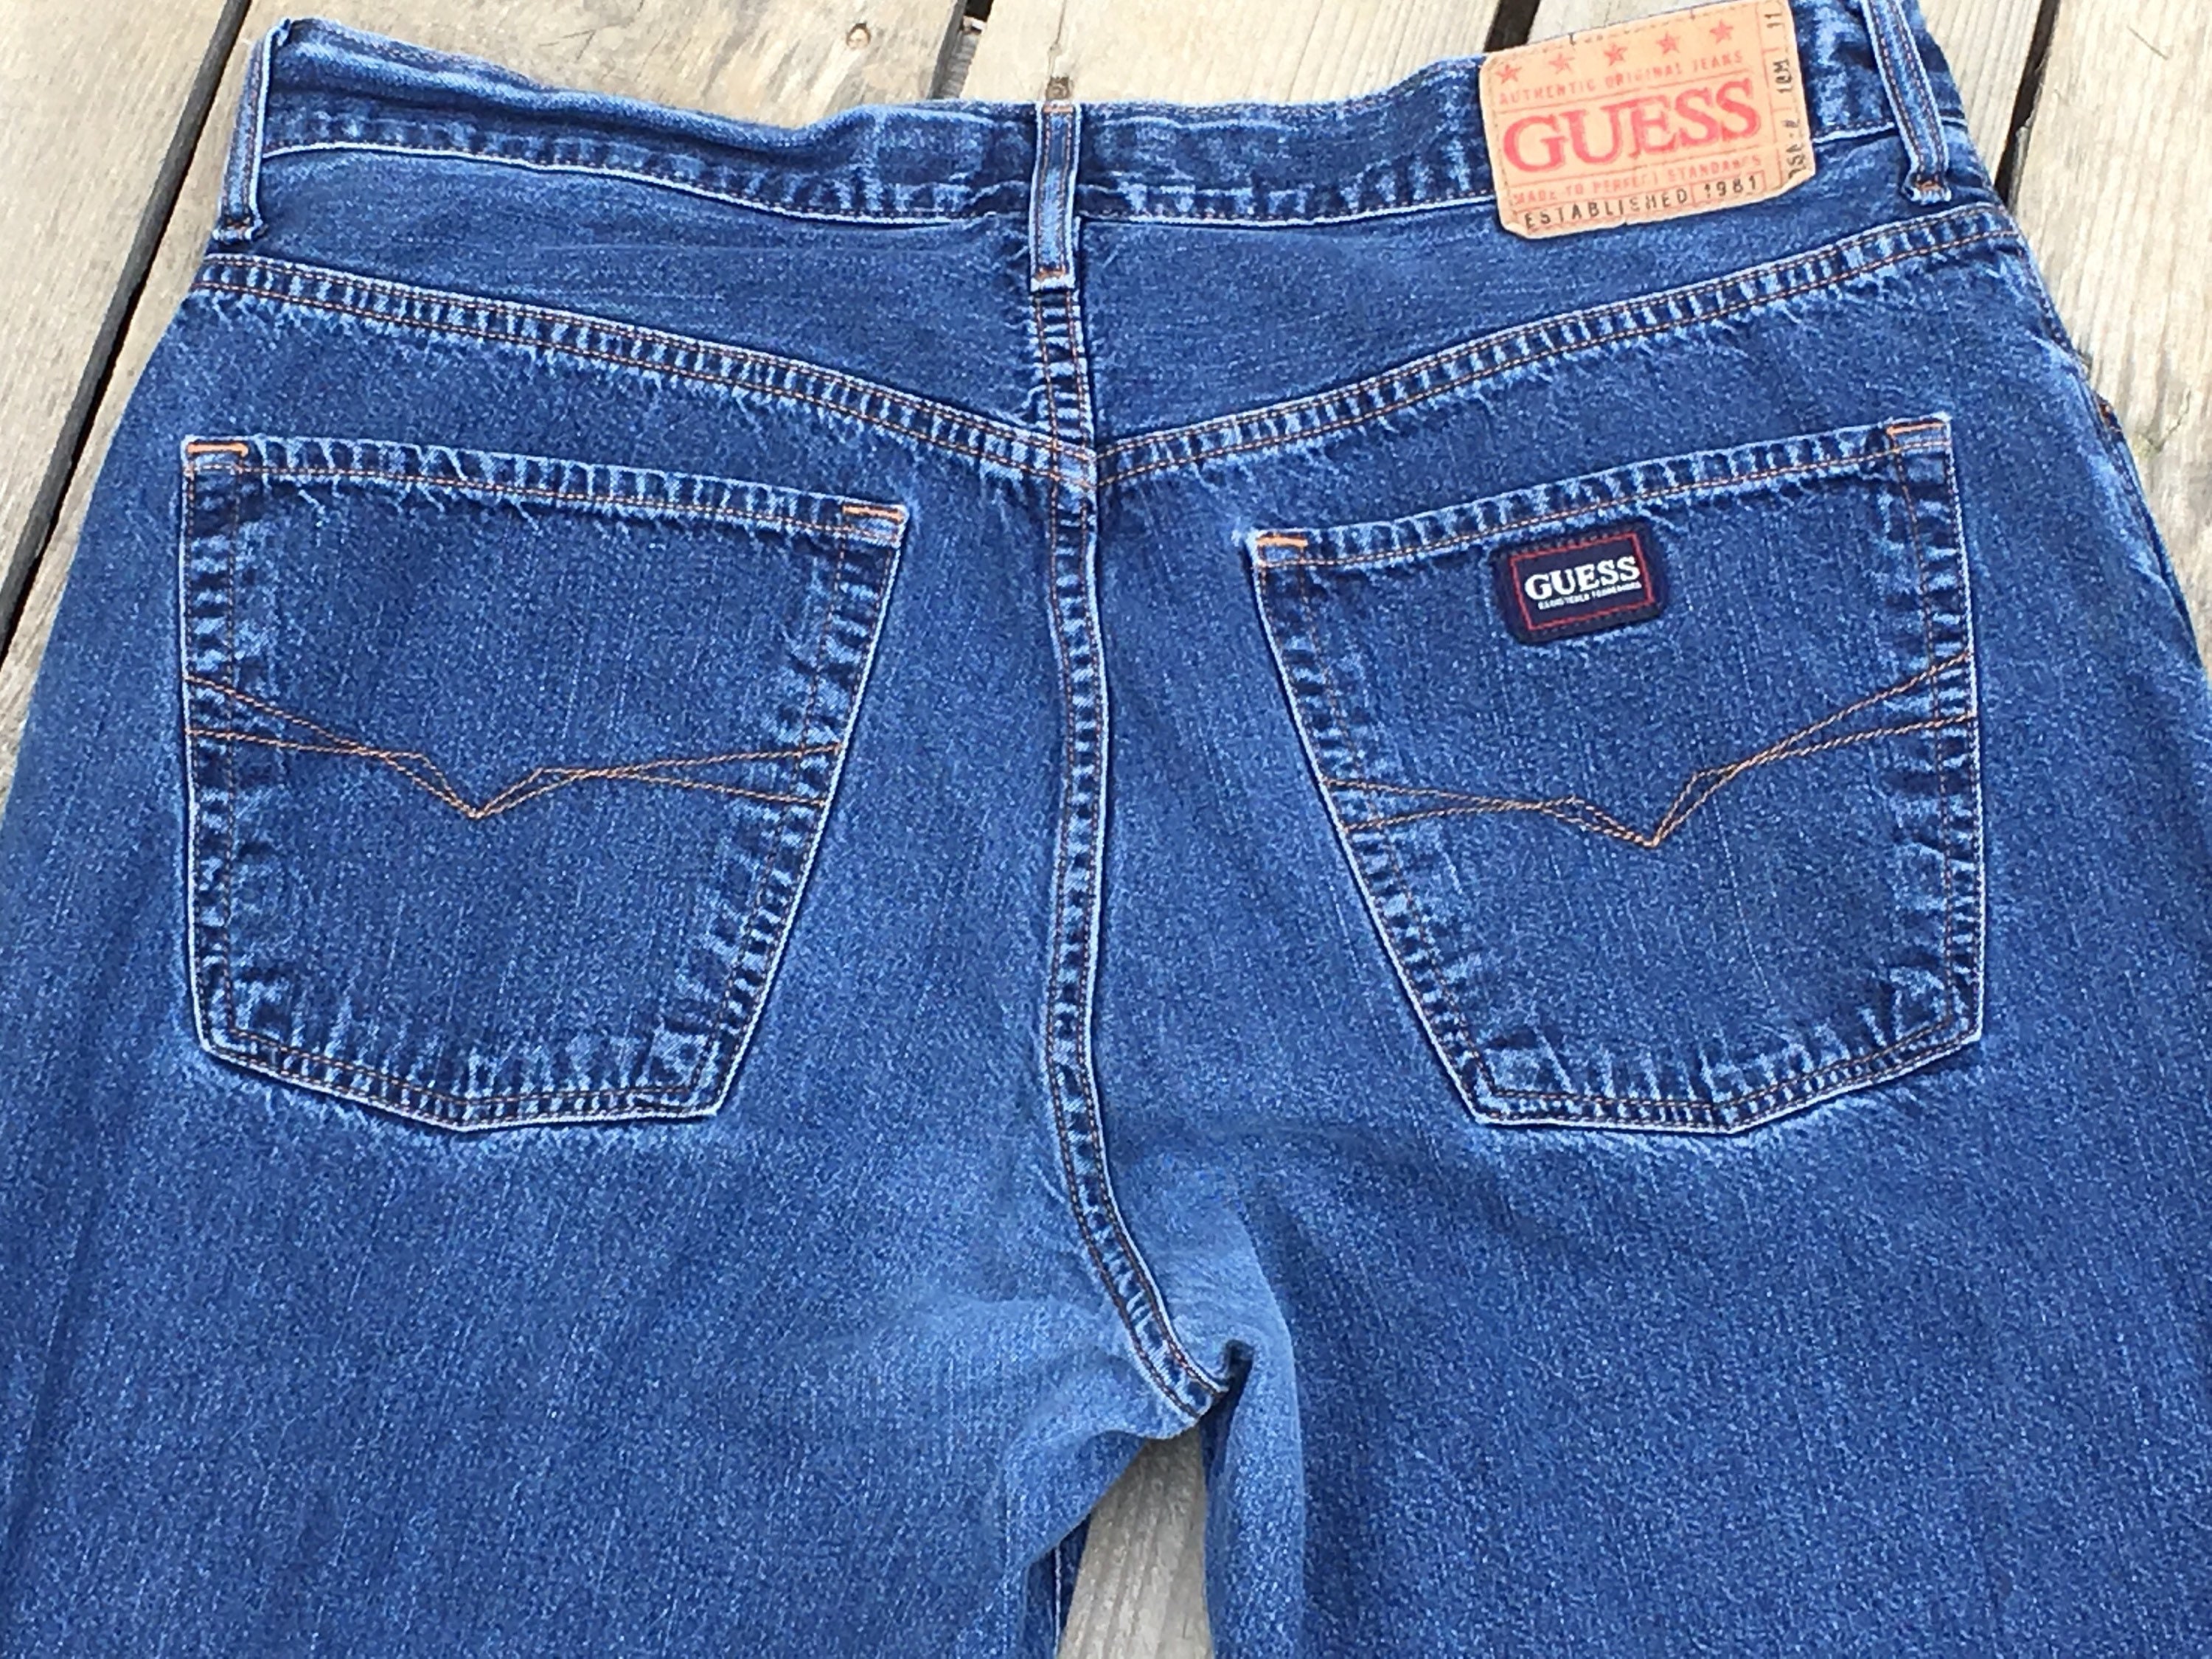 Vintage Guess Mom Jeans, Womens 35 Waist 29 Inseam Pants, Tall Rise ...